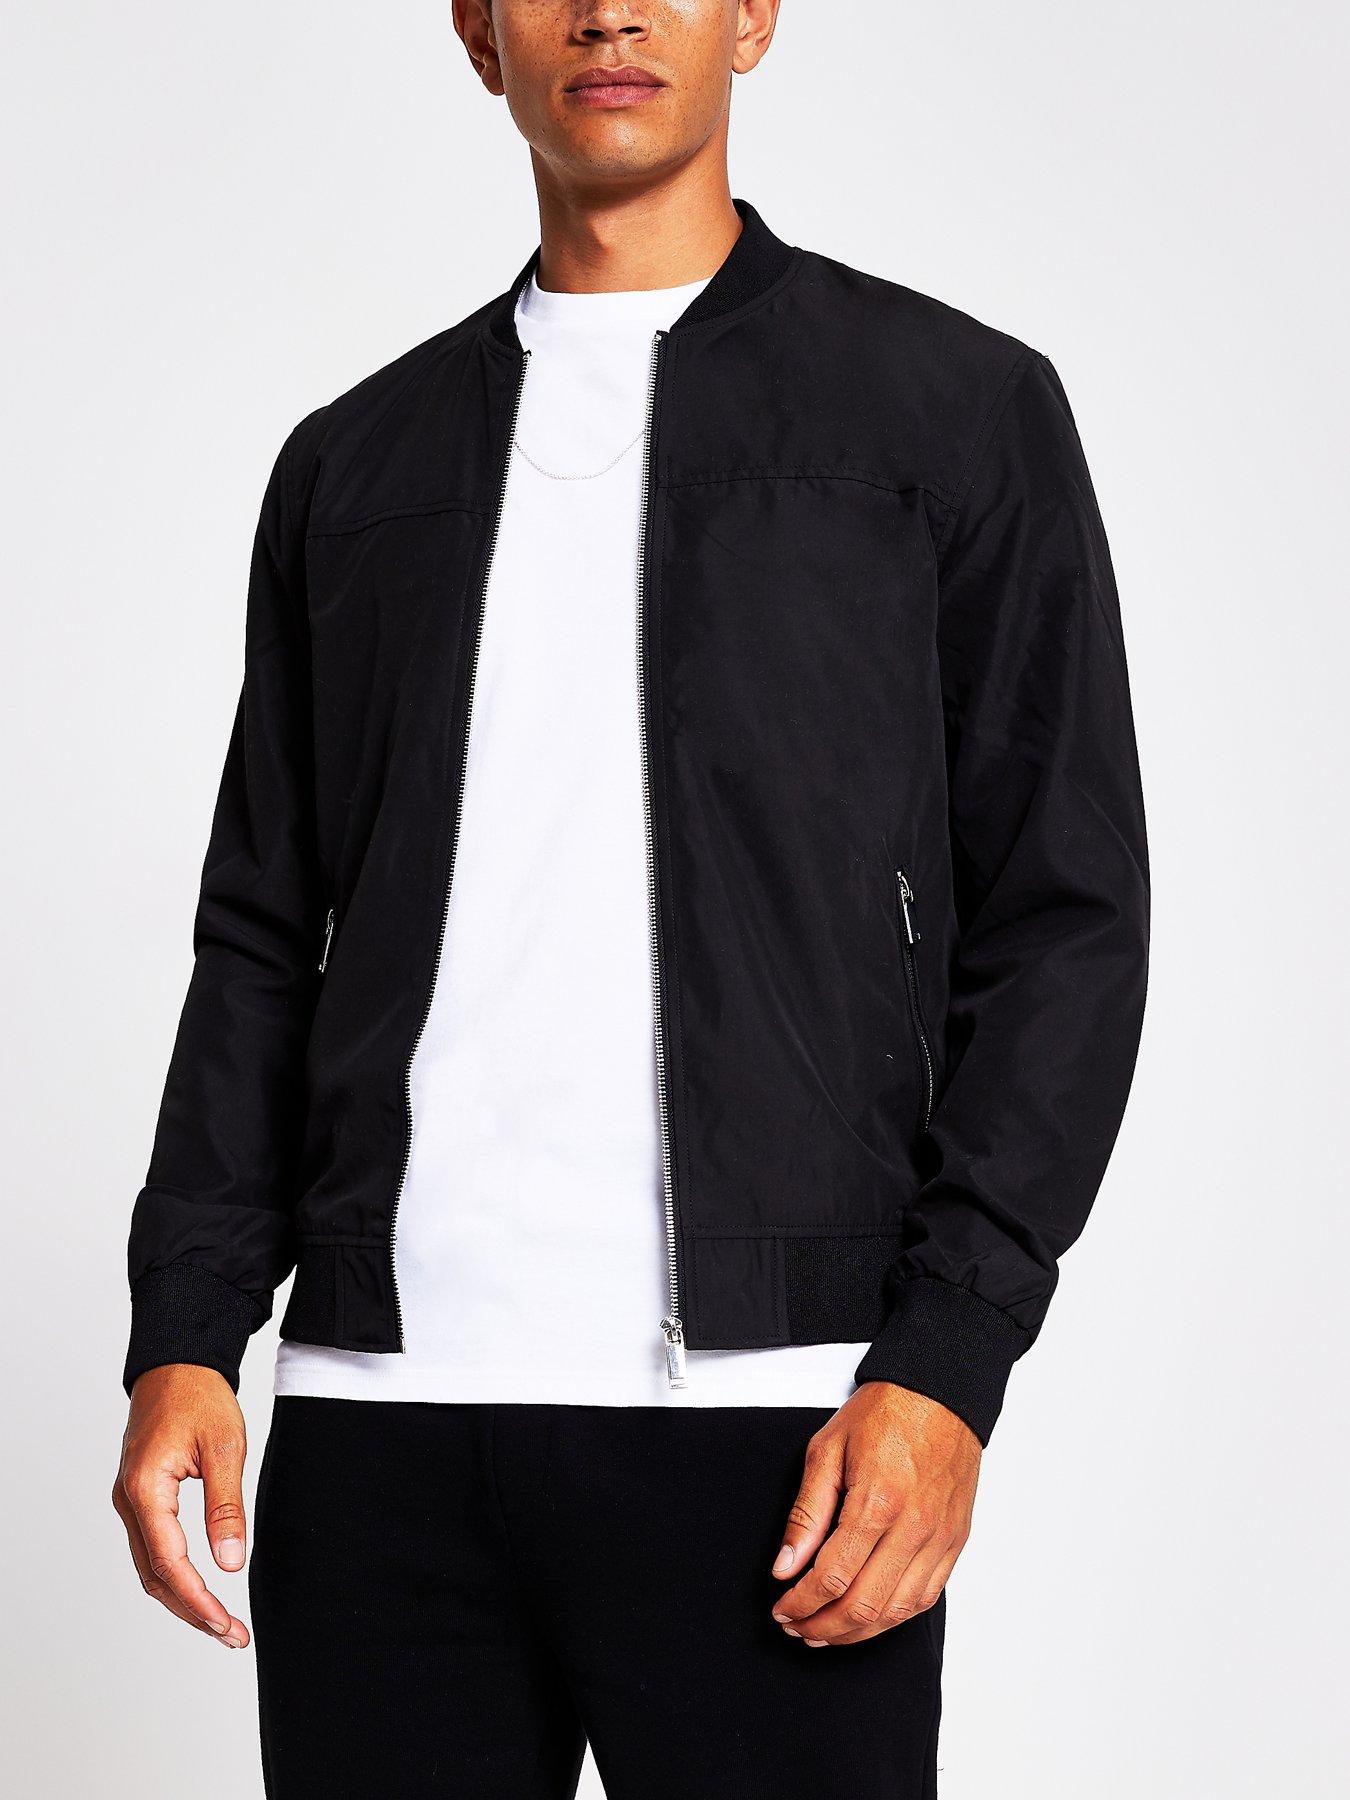 river island mens jackets saleUltimate Special Offers – 2021 New ...